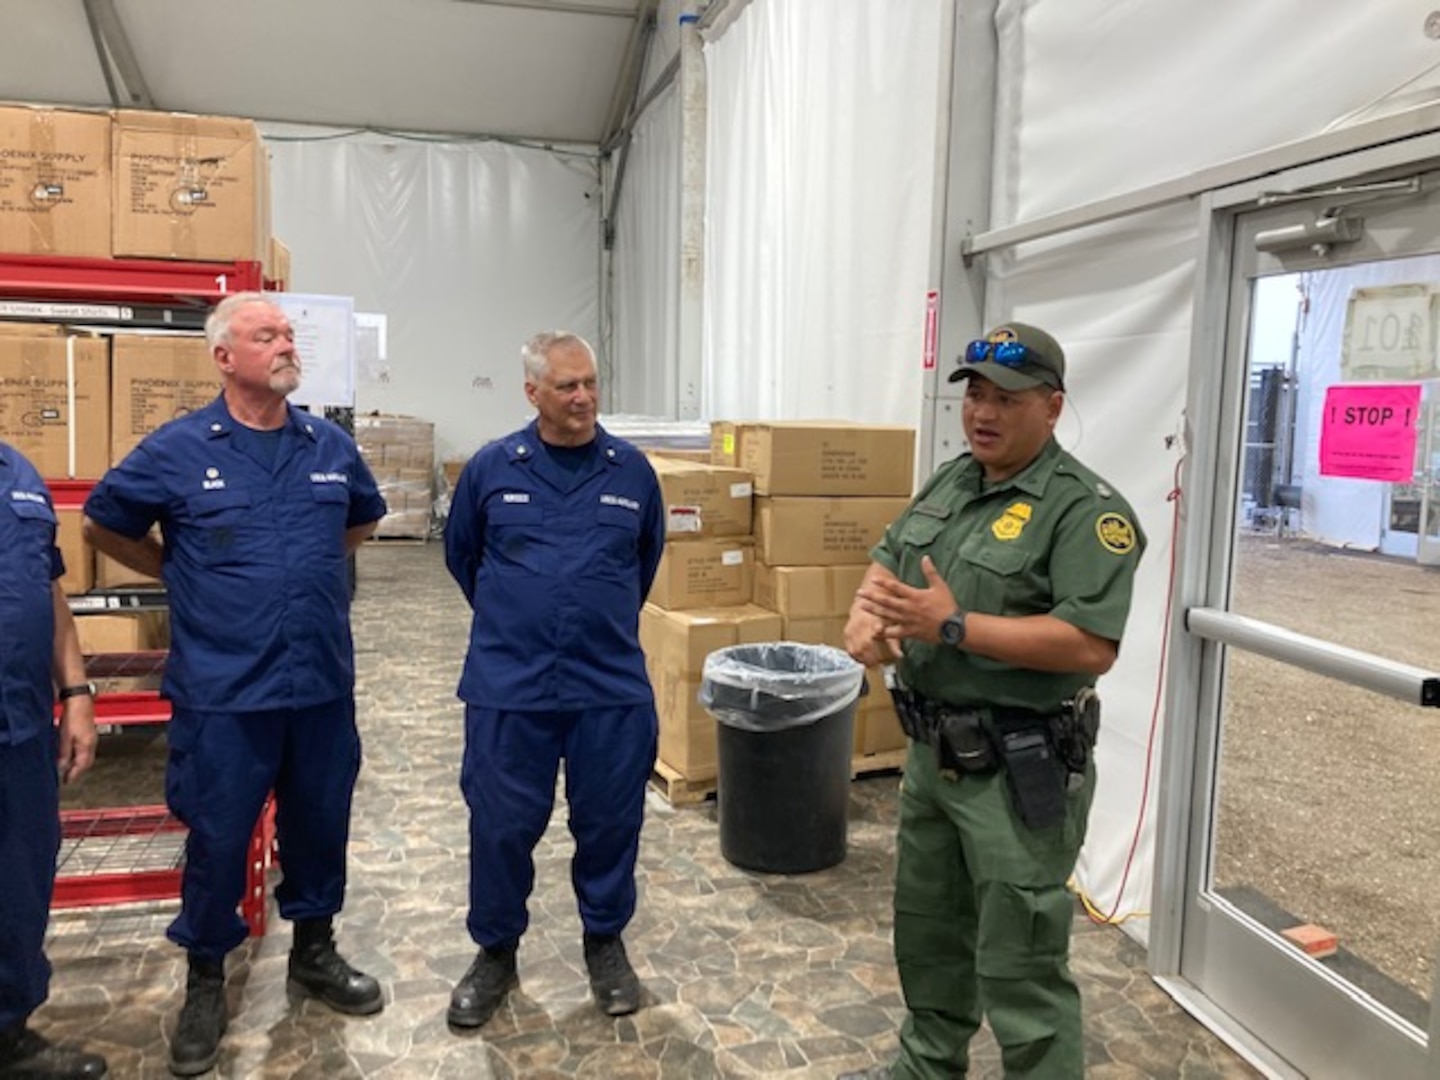 Auxiliarist Fred Black, Auxiliarist Wes Morosco, and Customs and Border Protection watch commander Anthony Cabarillo conduct an introduction meeting for the second wave of Auxiliary volunteers in Eagle Pass, Texas. (Coast Guard Auxiliary Photo by Commodore Tracy DeLaughter)